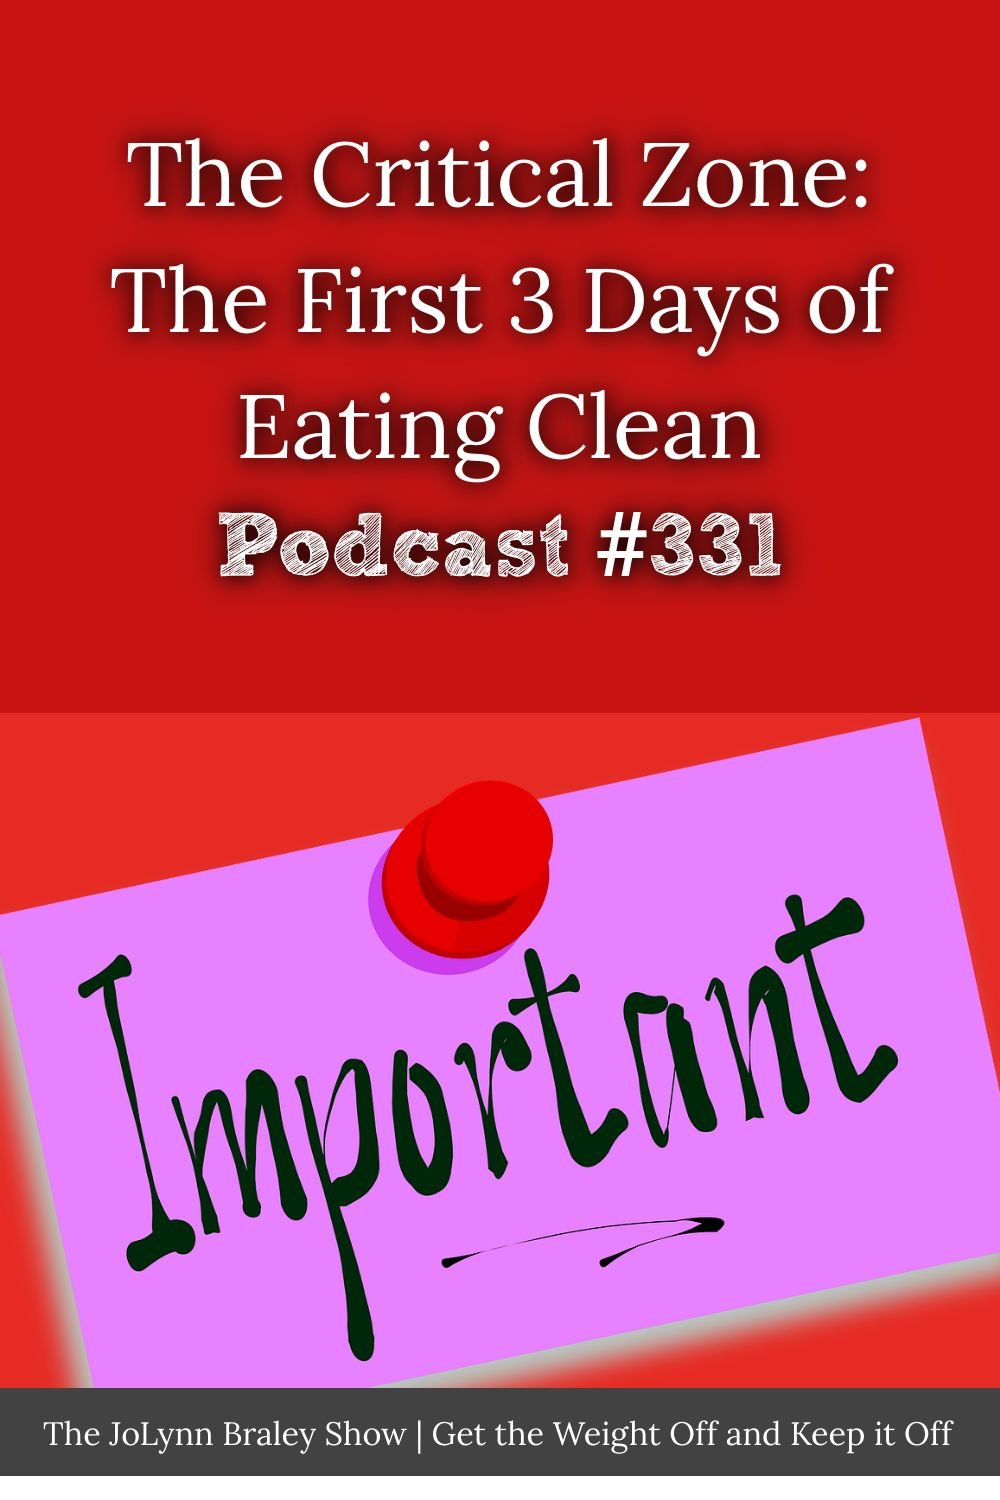 The Critical Zone: The First 3 Days of Eating Clean [Podcast #331]